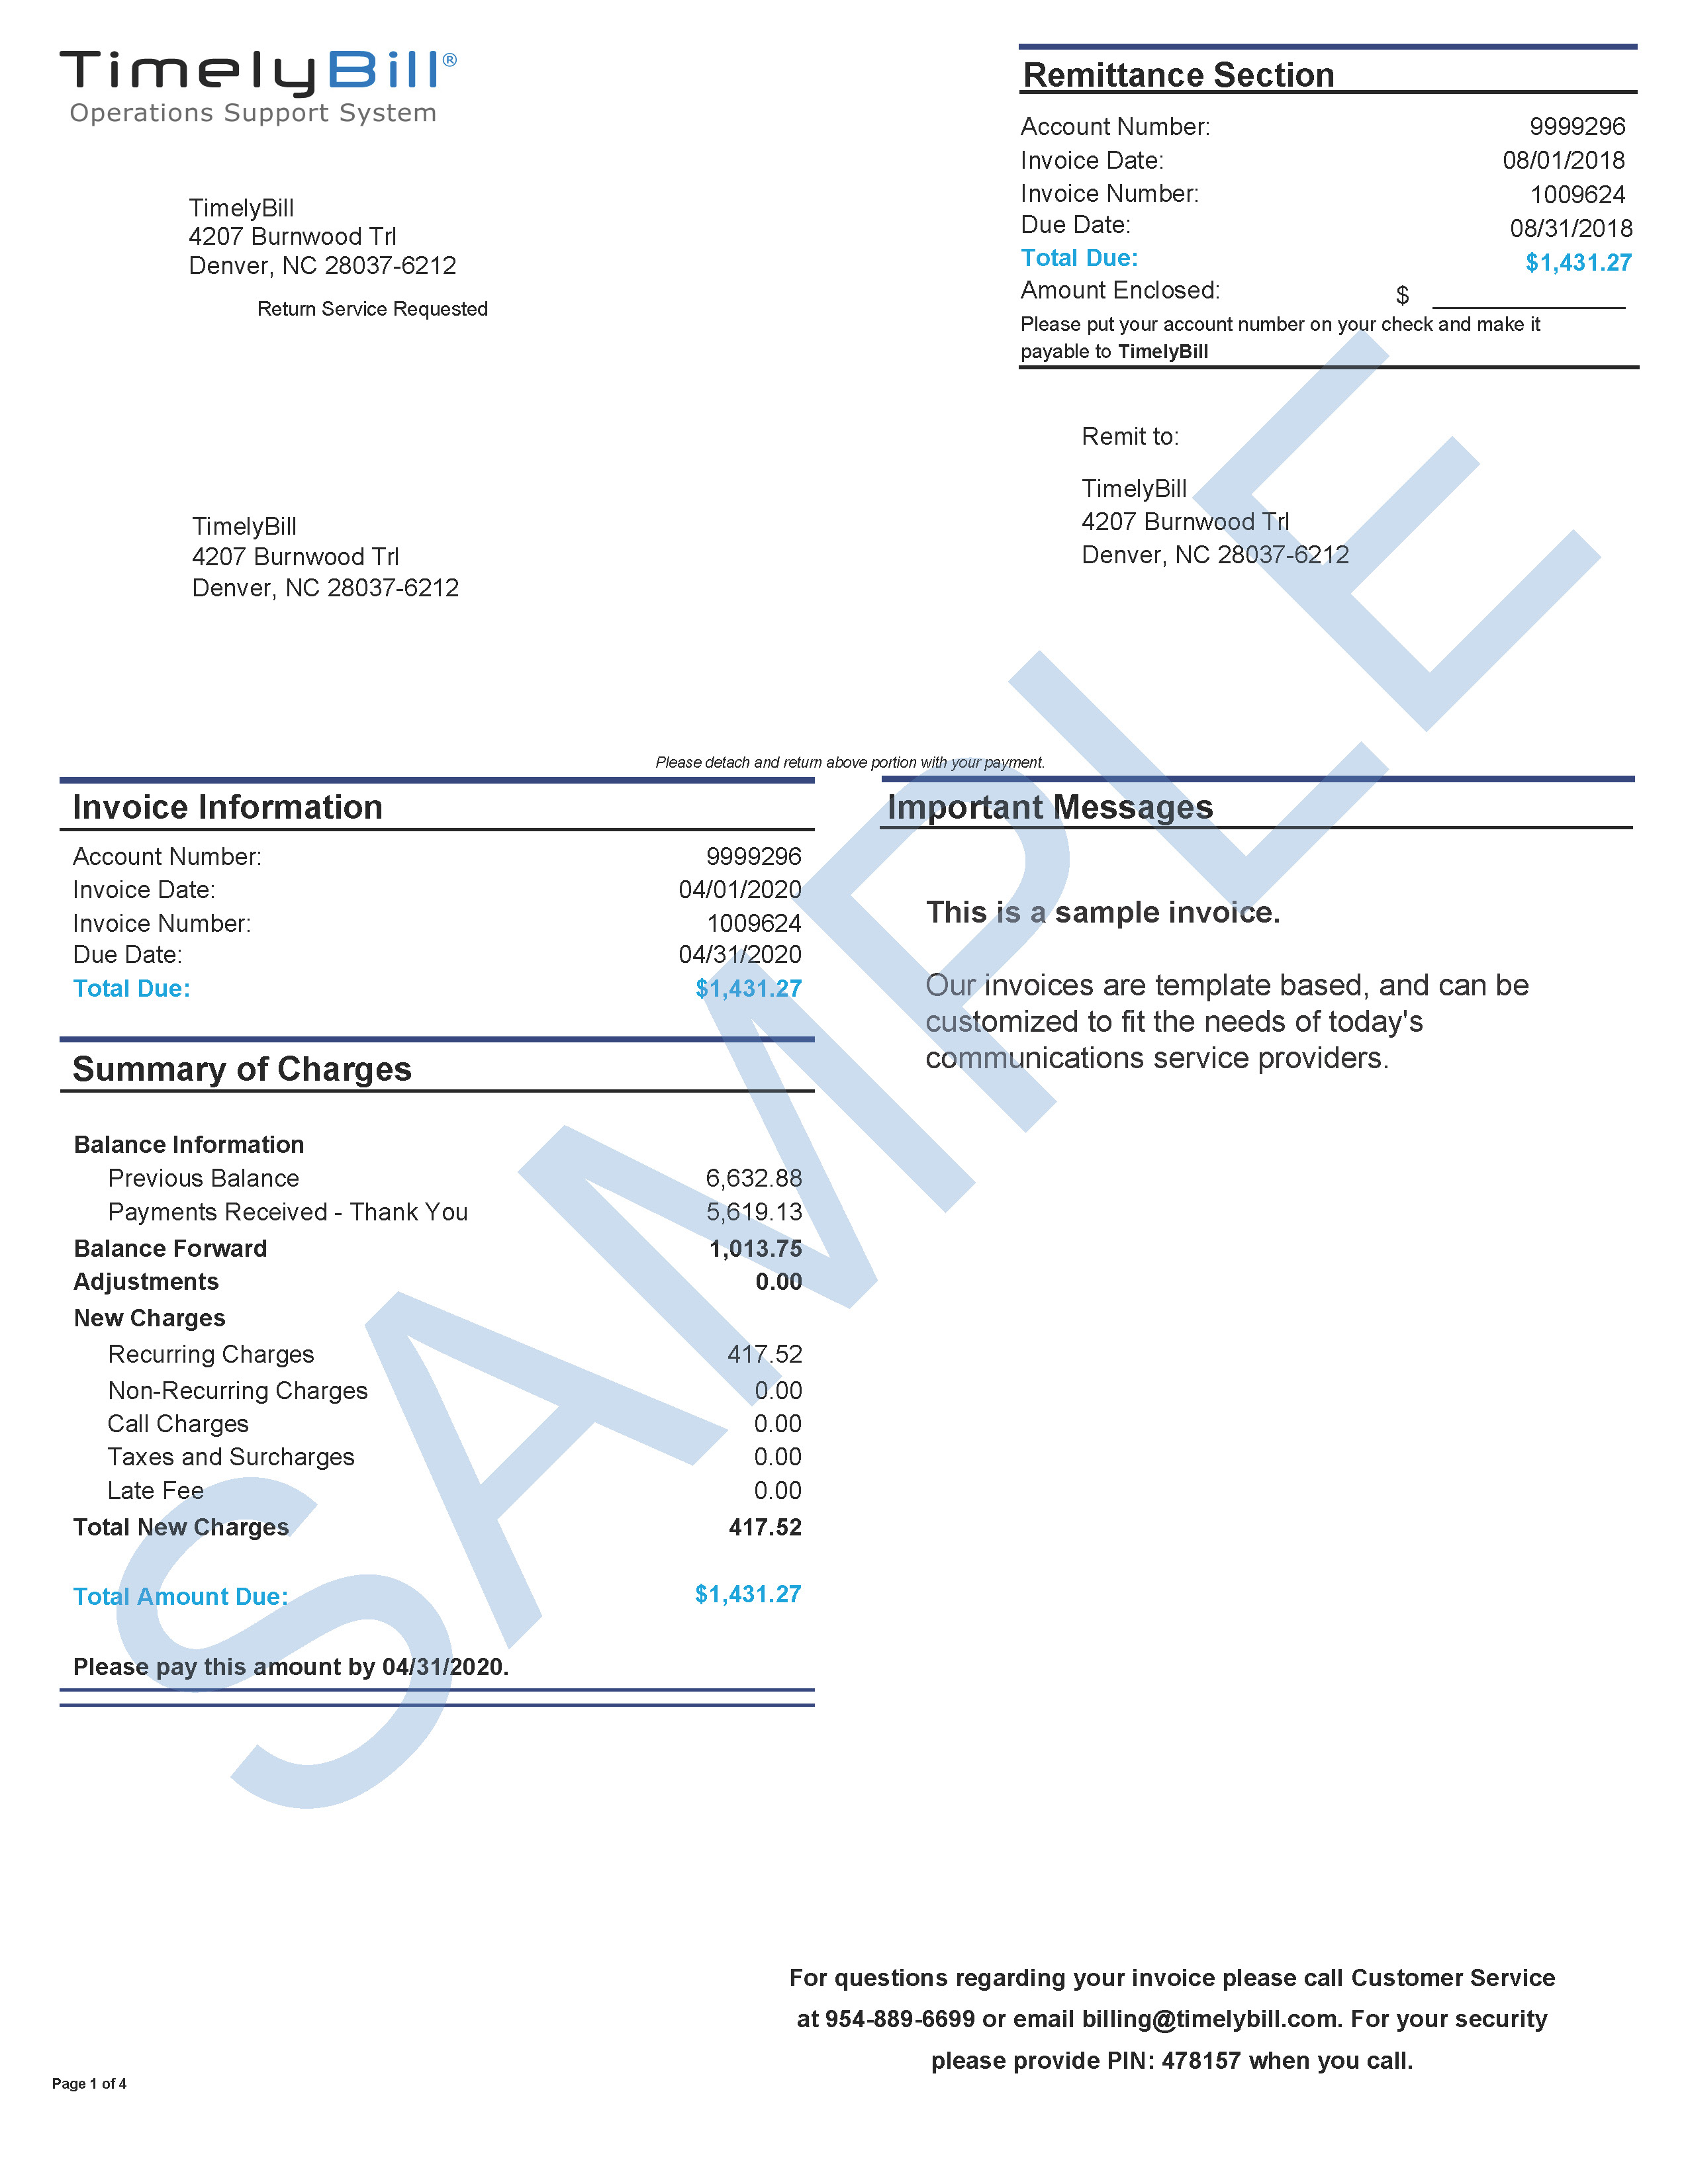 Sample VoIP Invoice Page 1